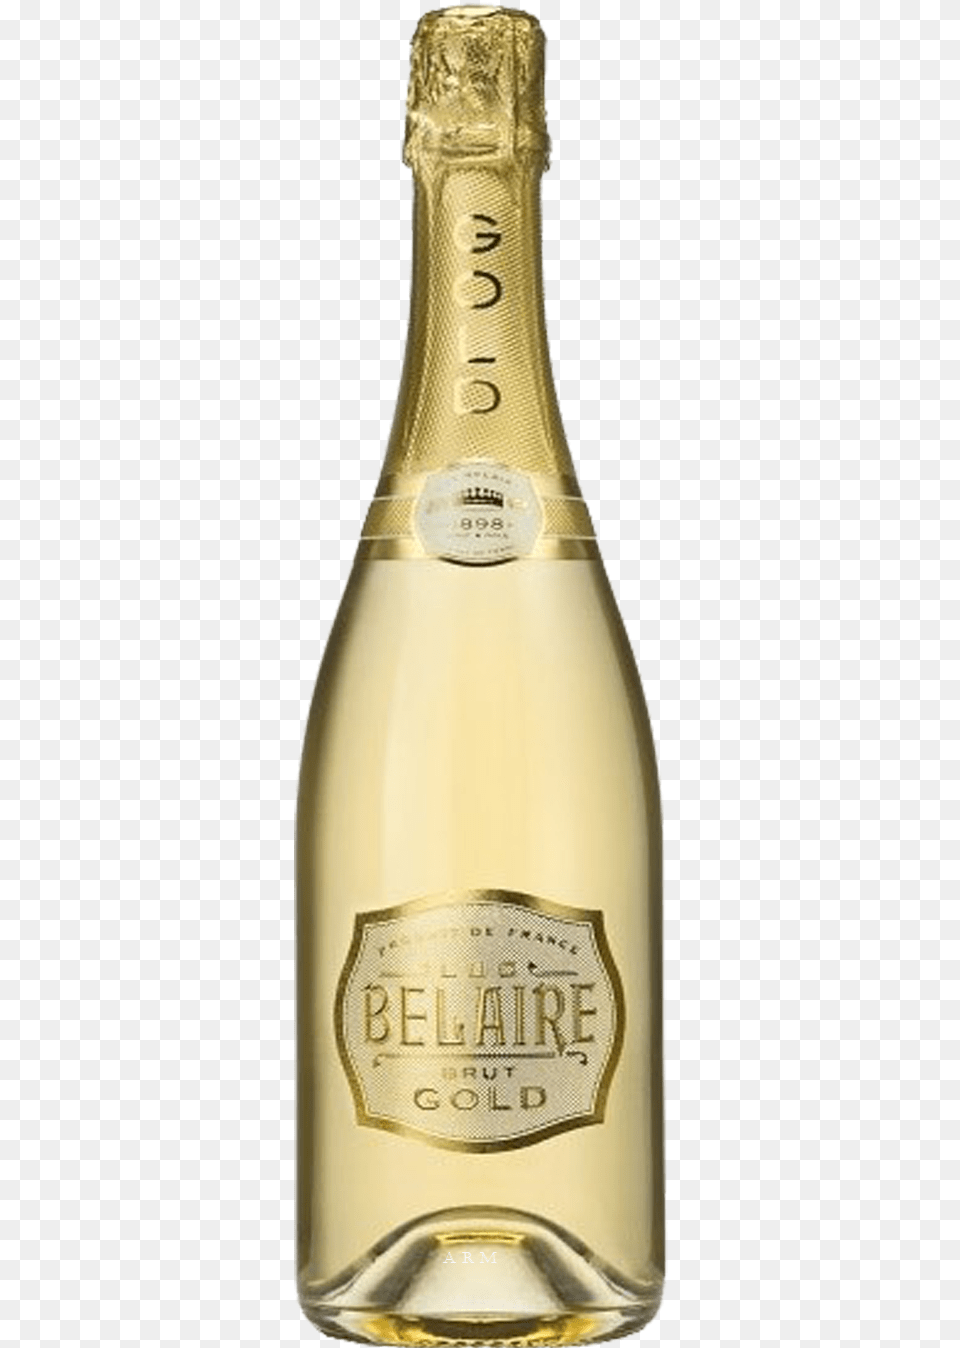 Belaire Gold Bottle Price, Alcohol, Beverage, Liquor, Wine Free Png